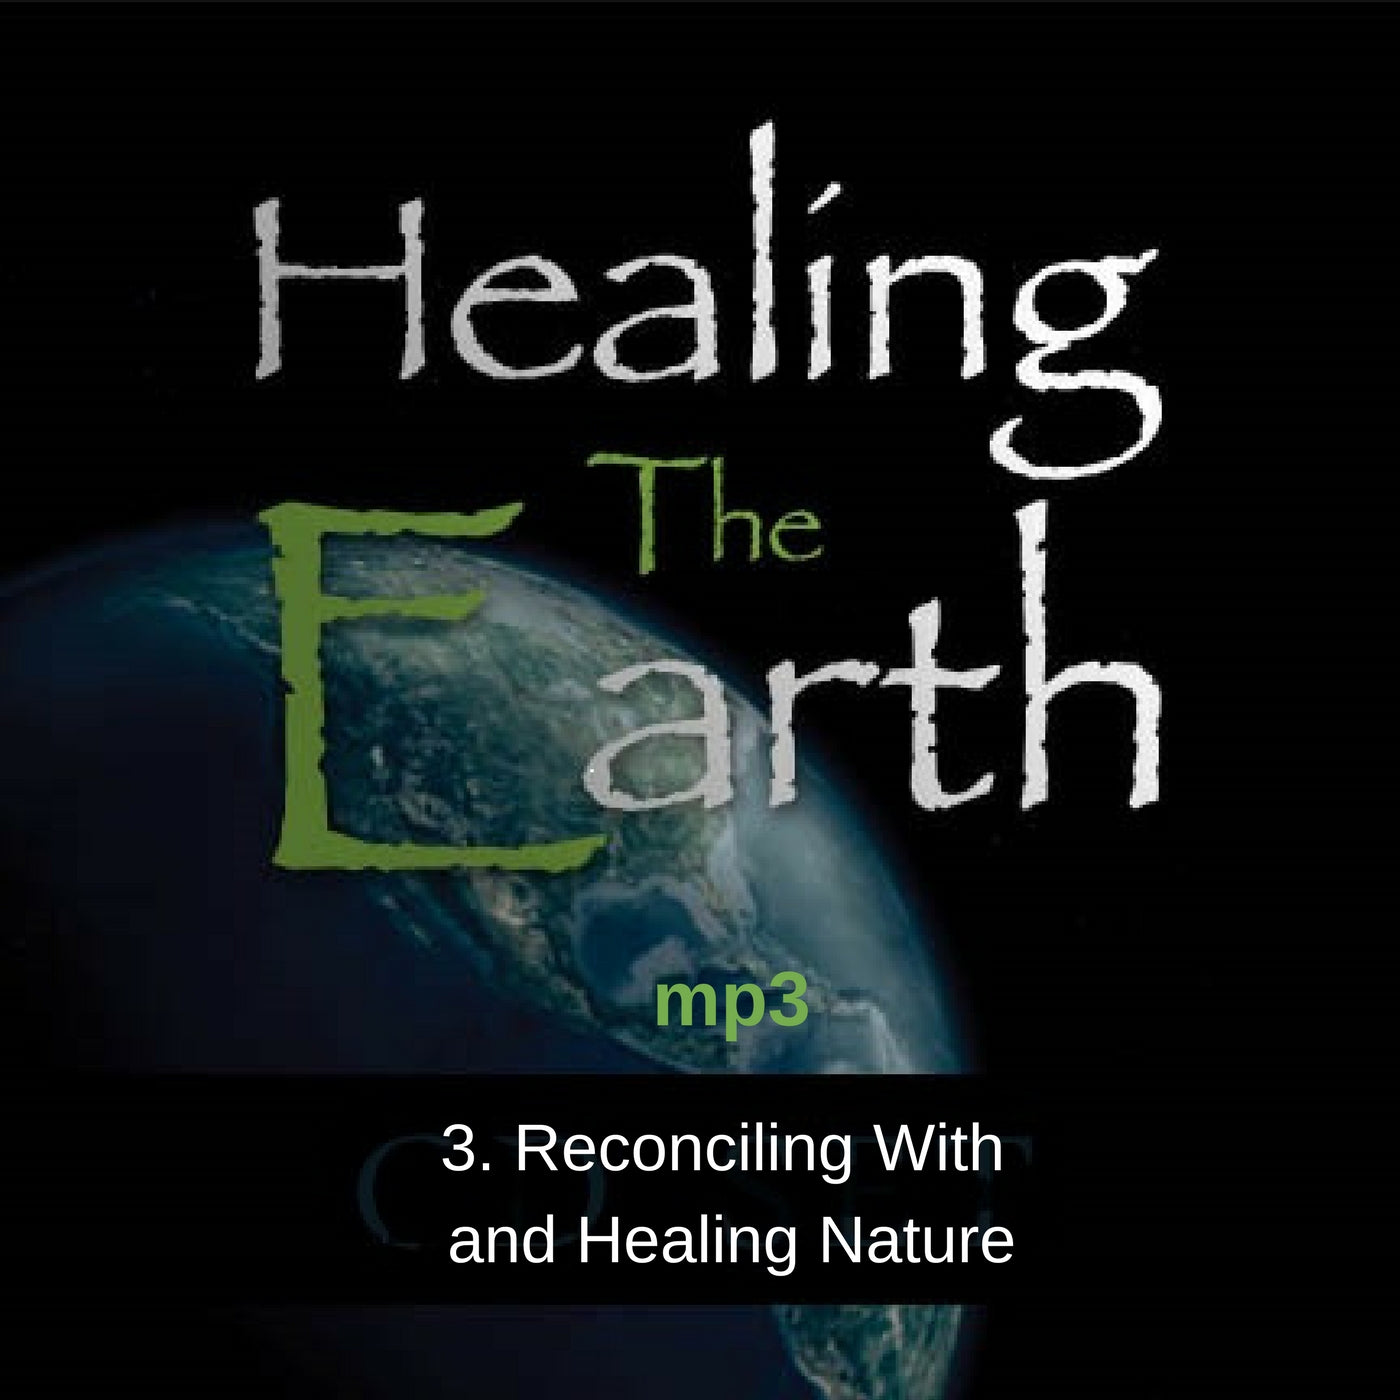 Healing the Earth Seminar: 3. Reconciling With and Healing Nature (mp3) - Elijah House